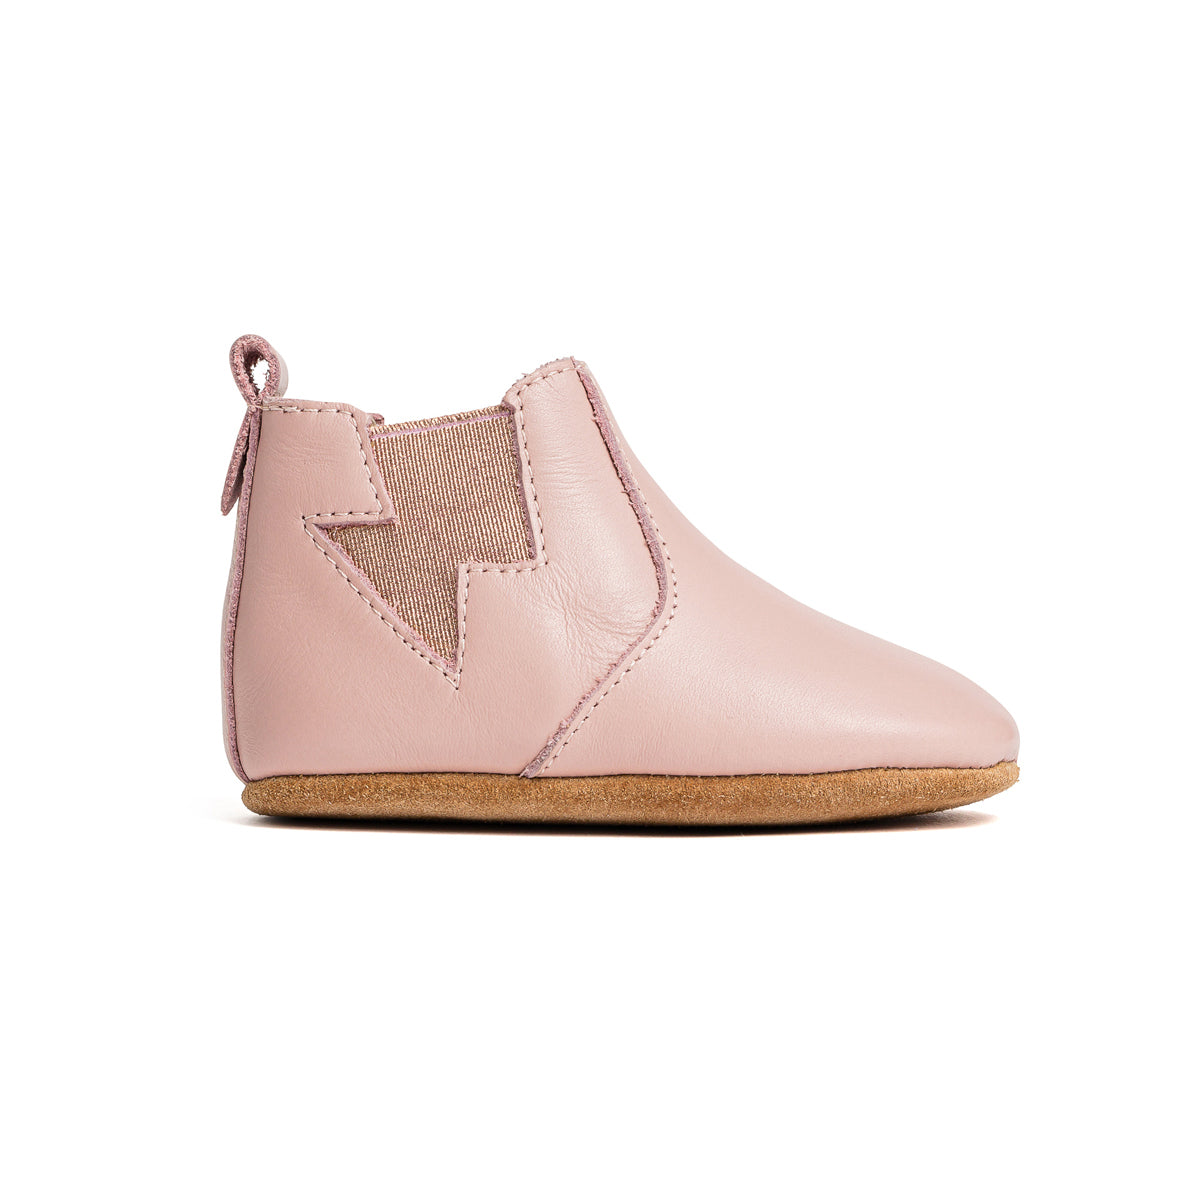 Side view of baby boot in colour blush with lightning detail